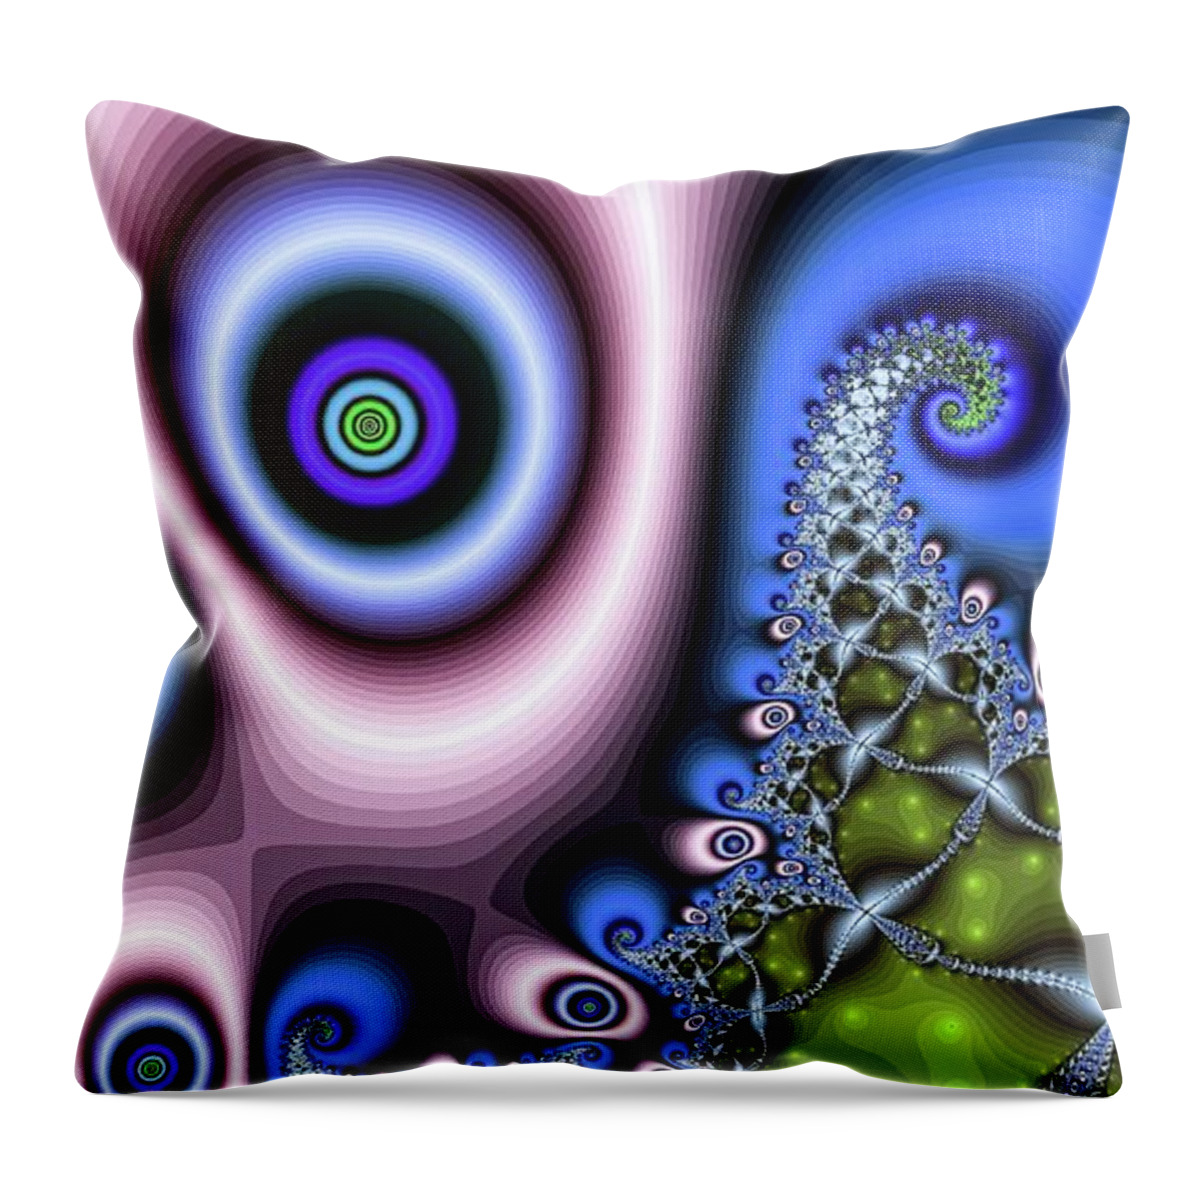 Fractal Throw Pillow featuring the digital art Blue Dancing Eye by Don Northup